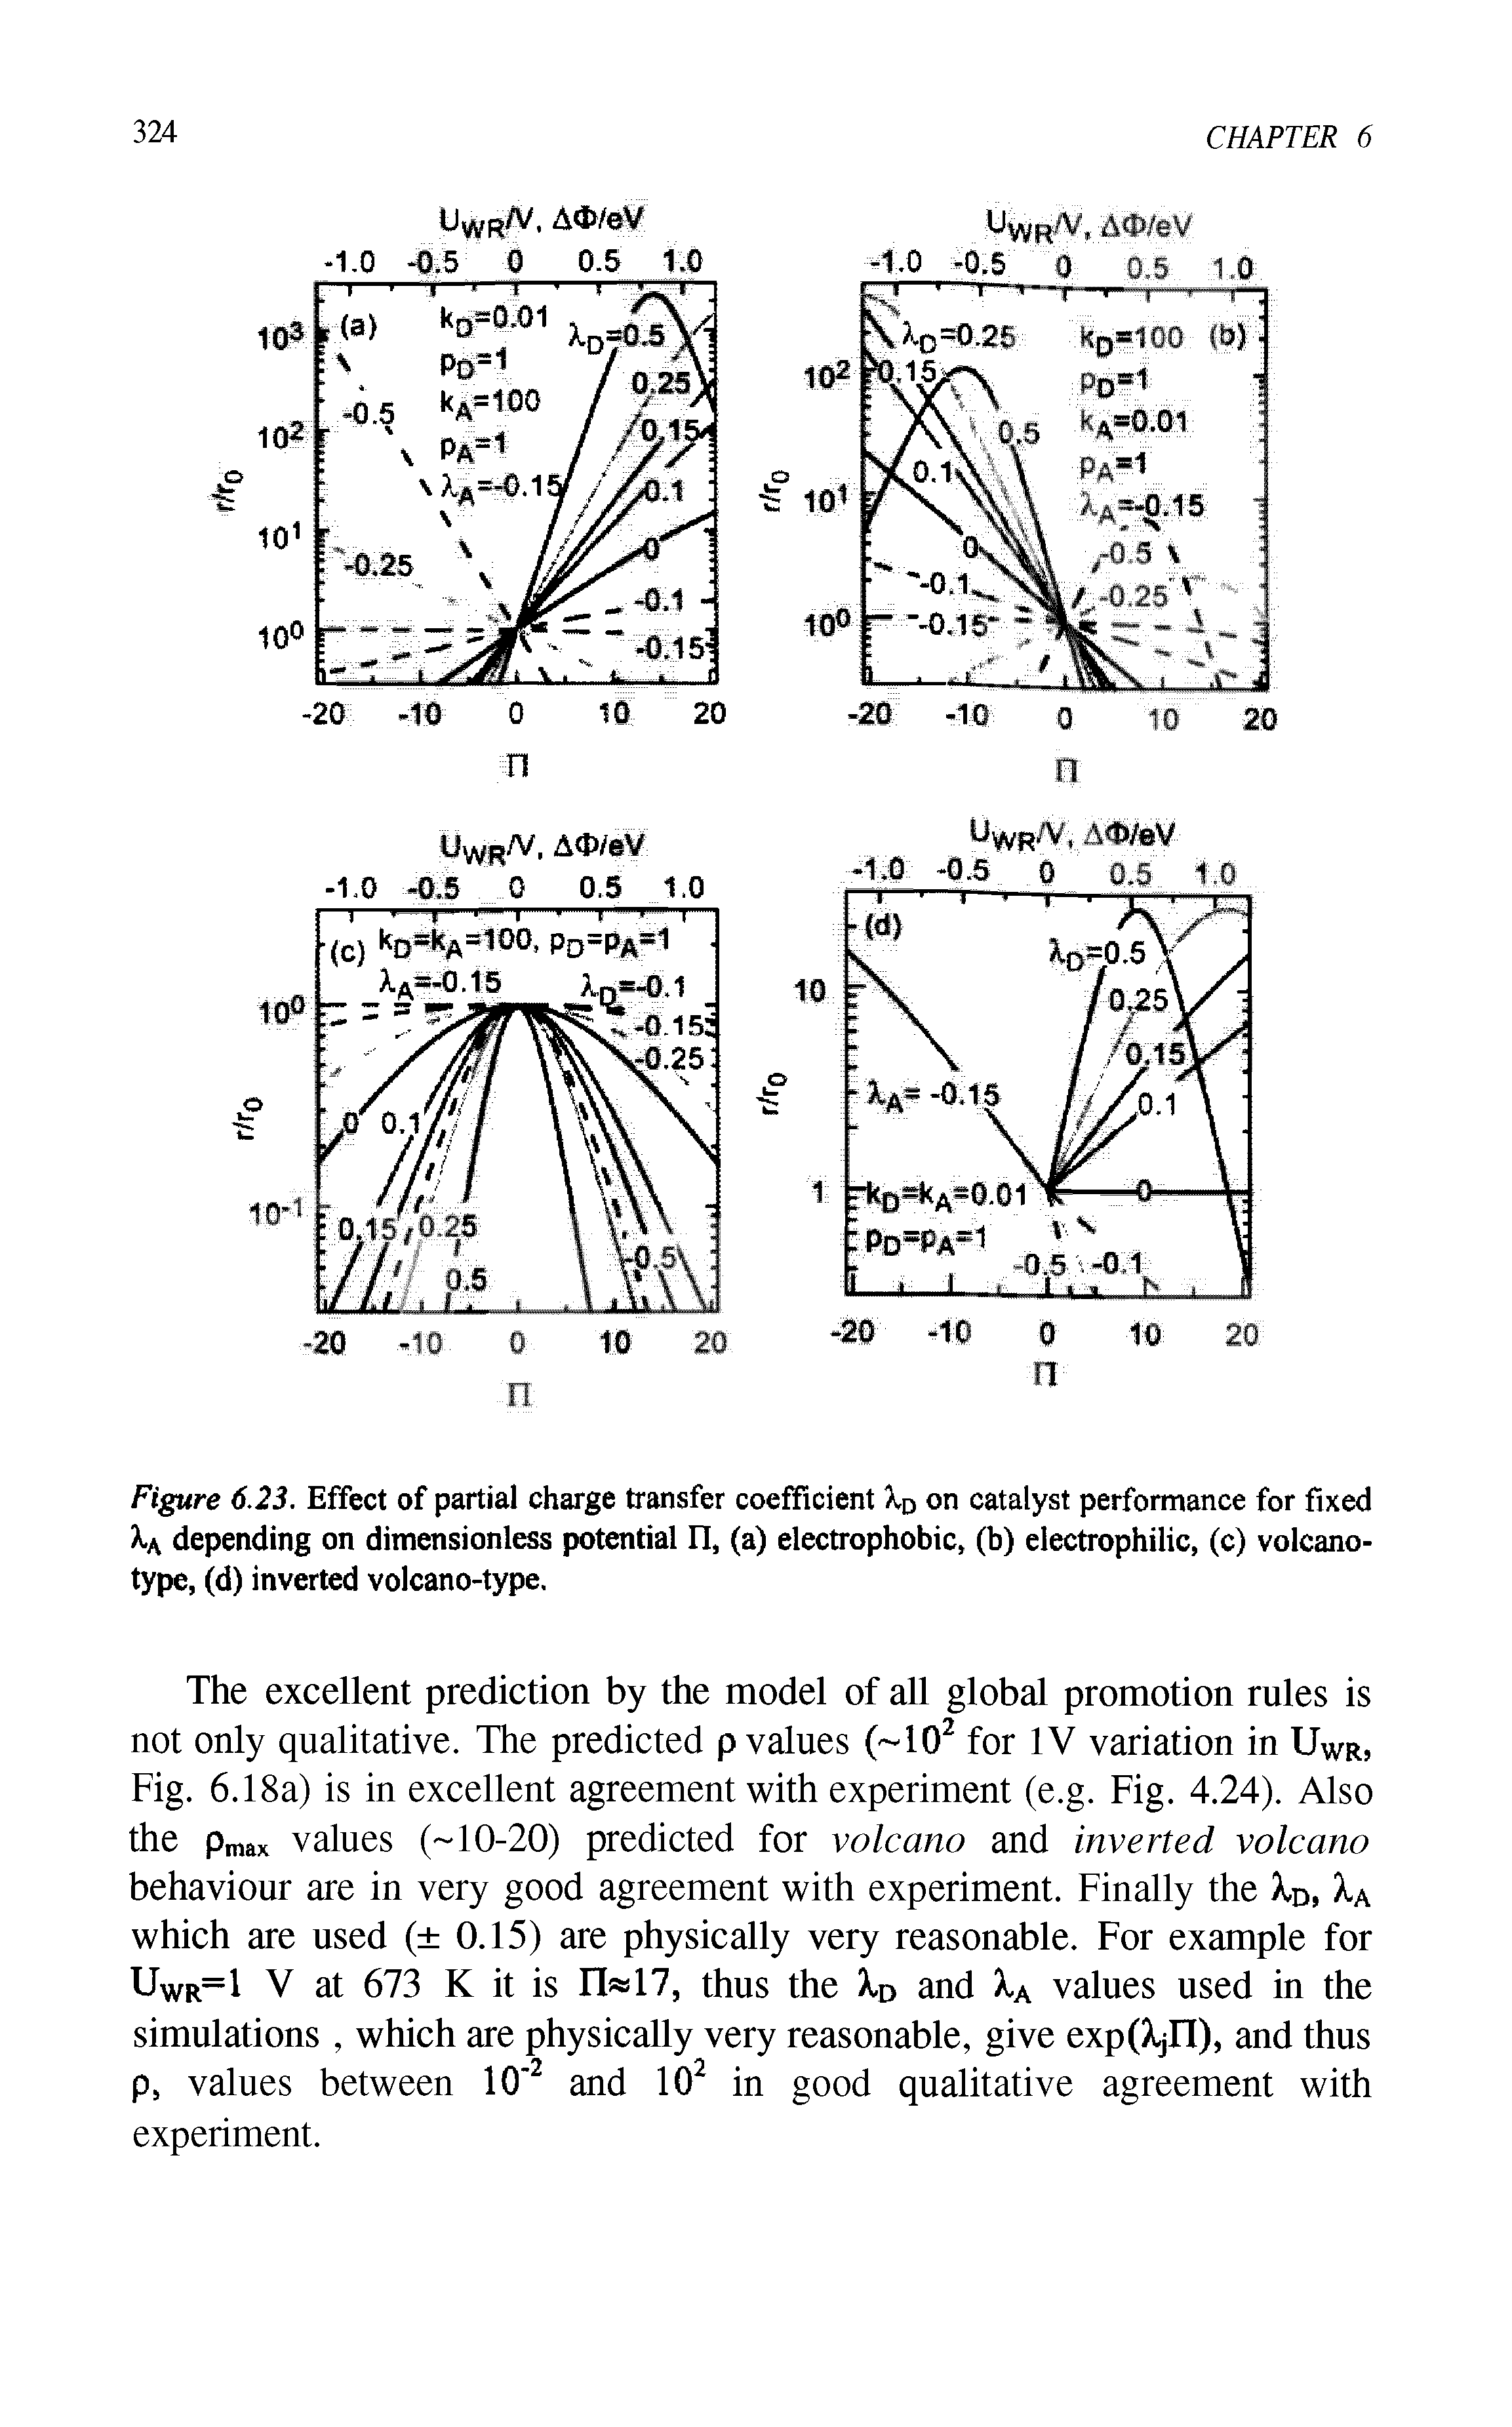 Figure 6.23. Effect of partial charge transfer coefficient XD on catalyst performance for fixed X.A depending on dimensionless potential n, (a) electrophobic, (b) electrophilic, (c) volcano-type, (d) inverted volcano-type.